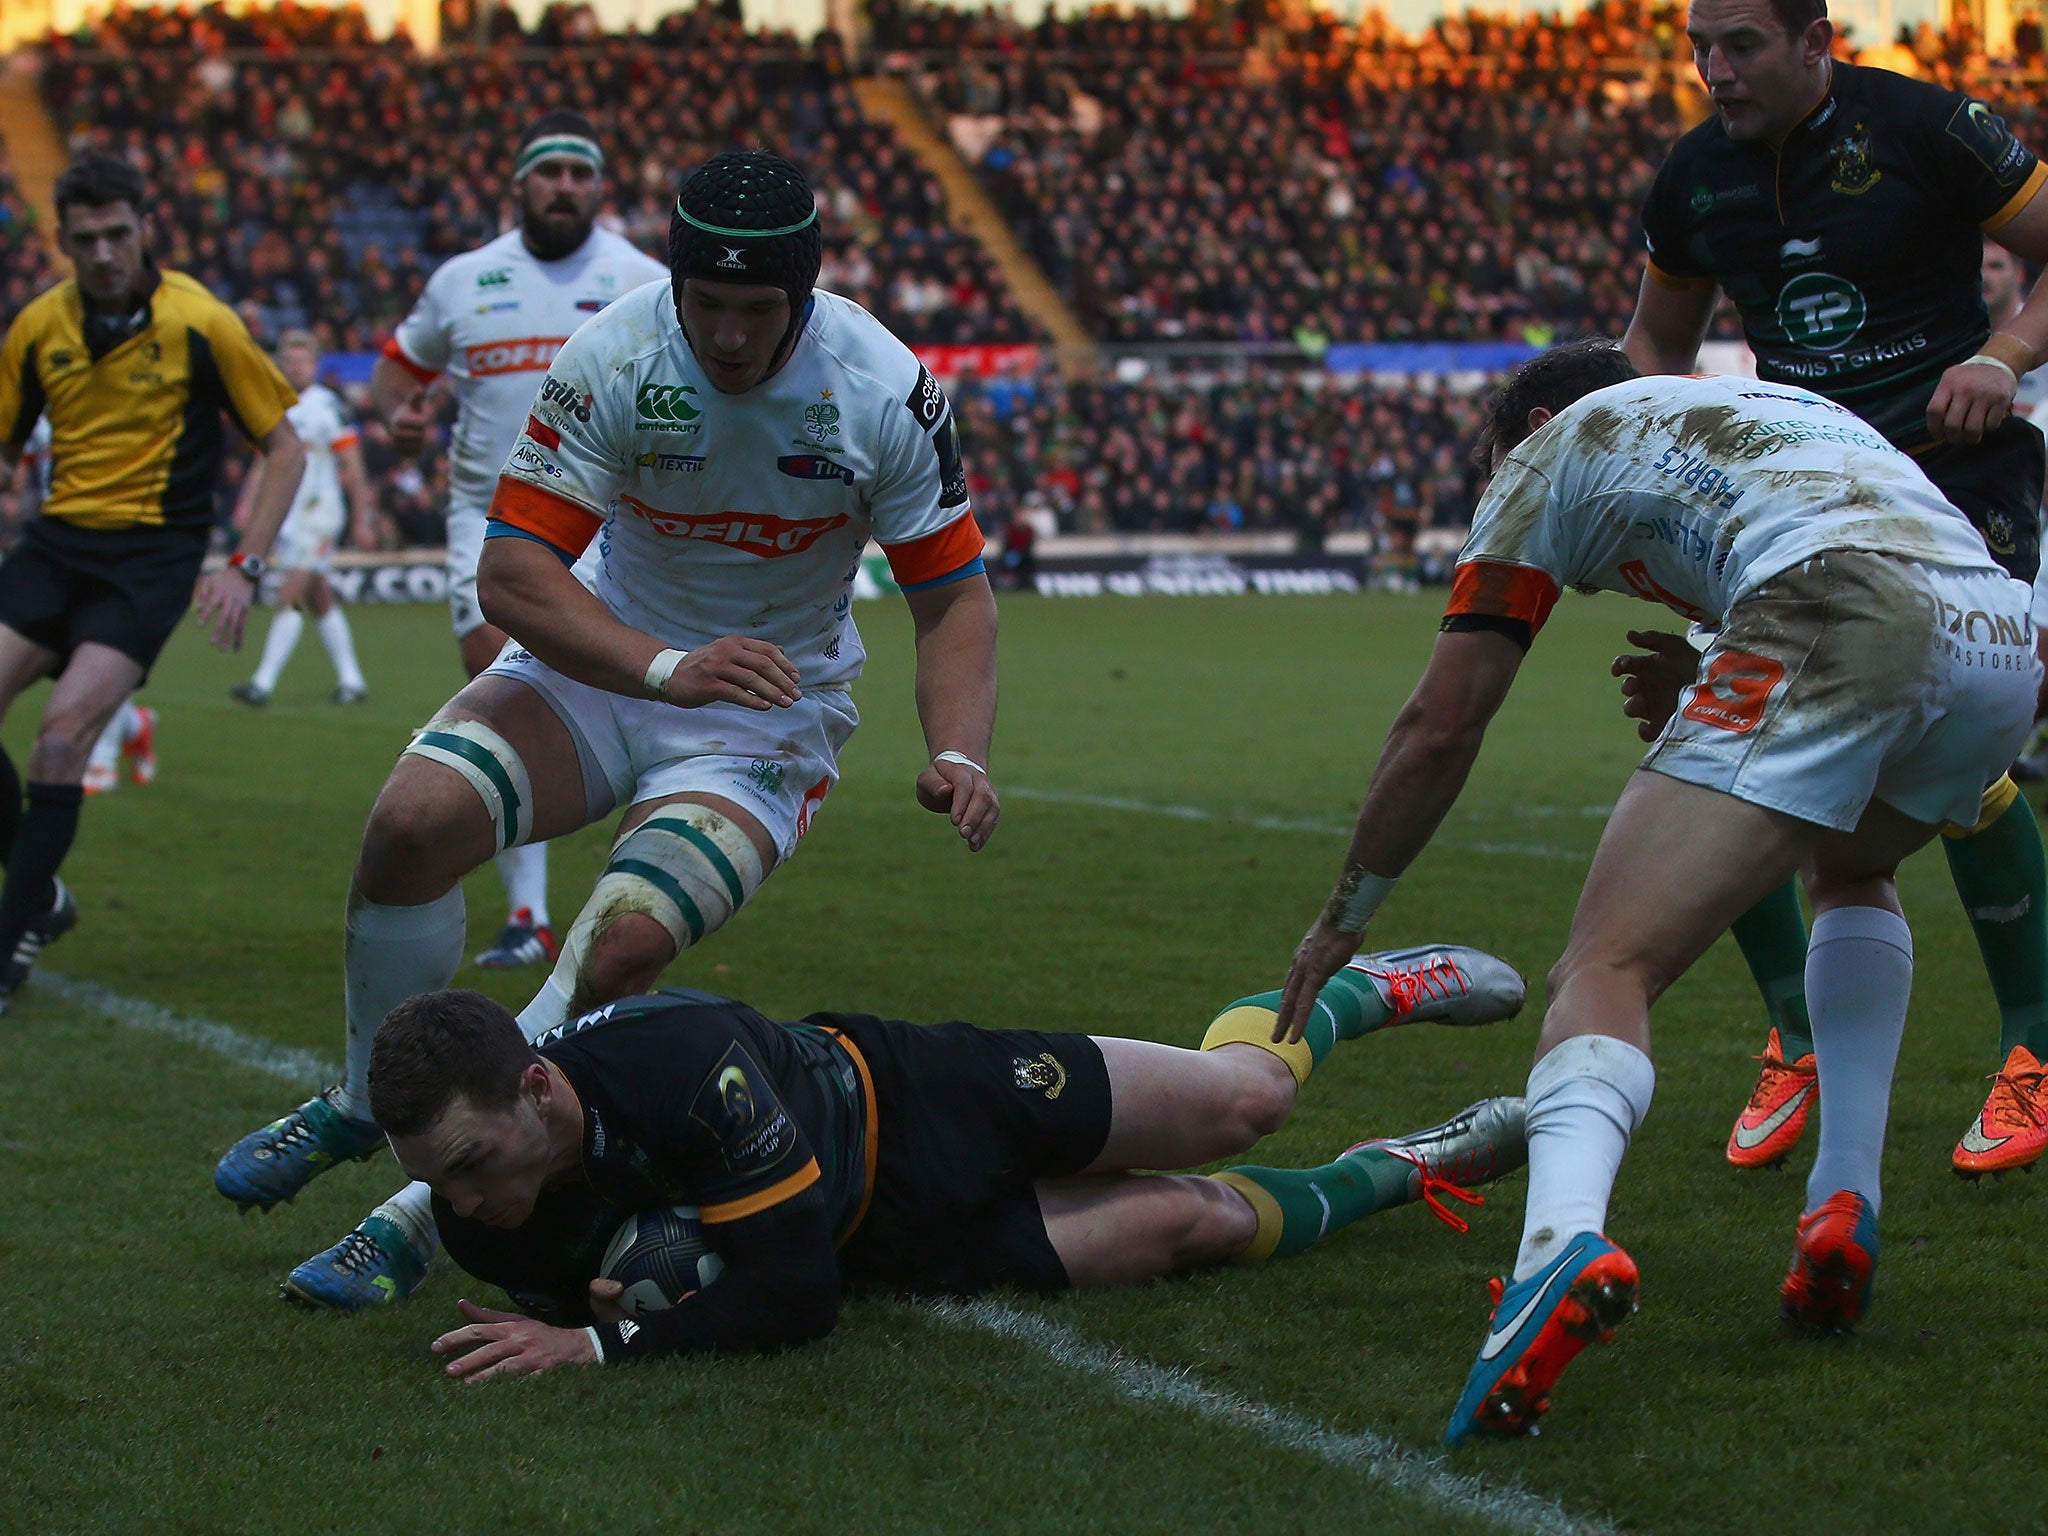 George North dives over the try line